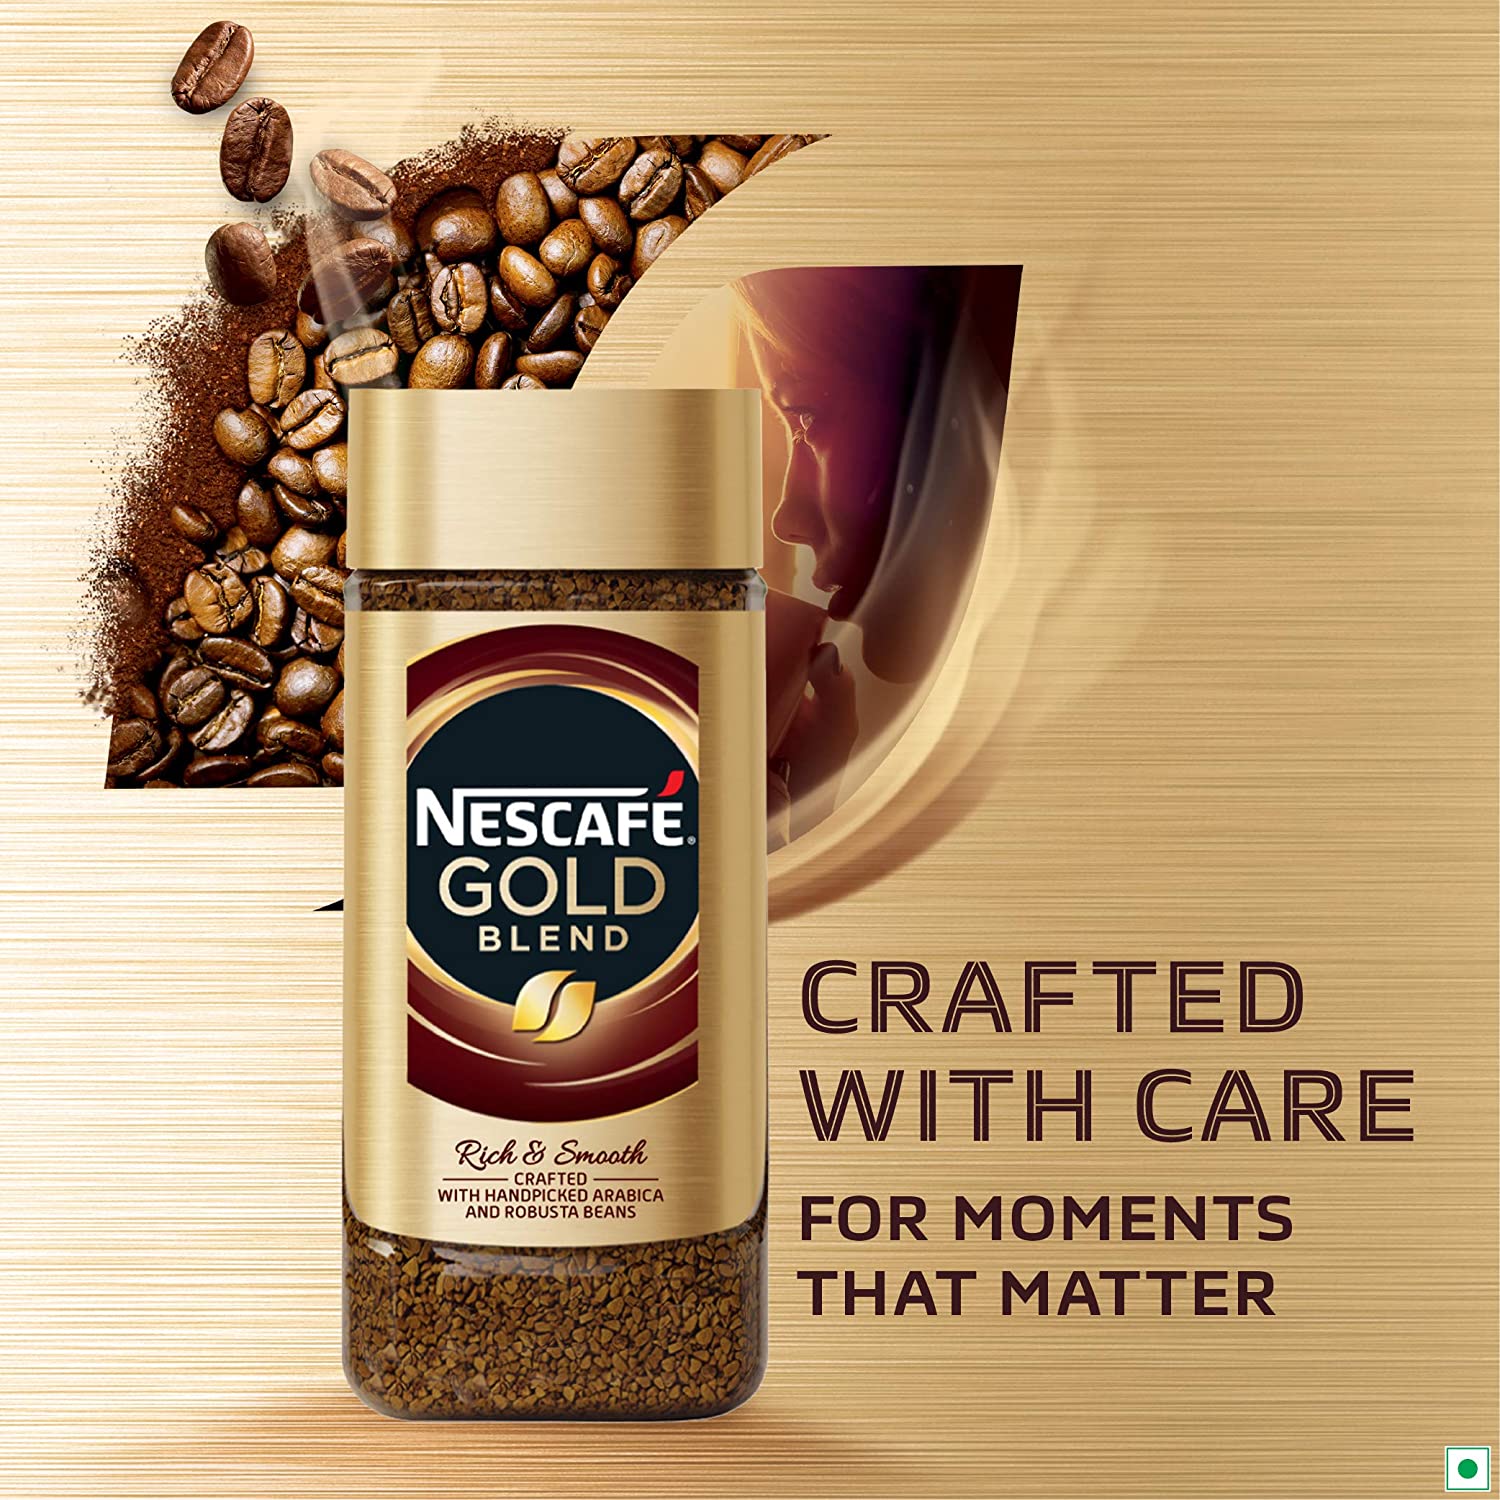 NESCAFÉ Gold Blend Rich & Smooth Soluble Instant Coffee Powder